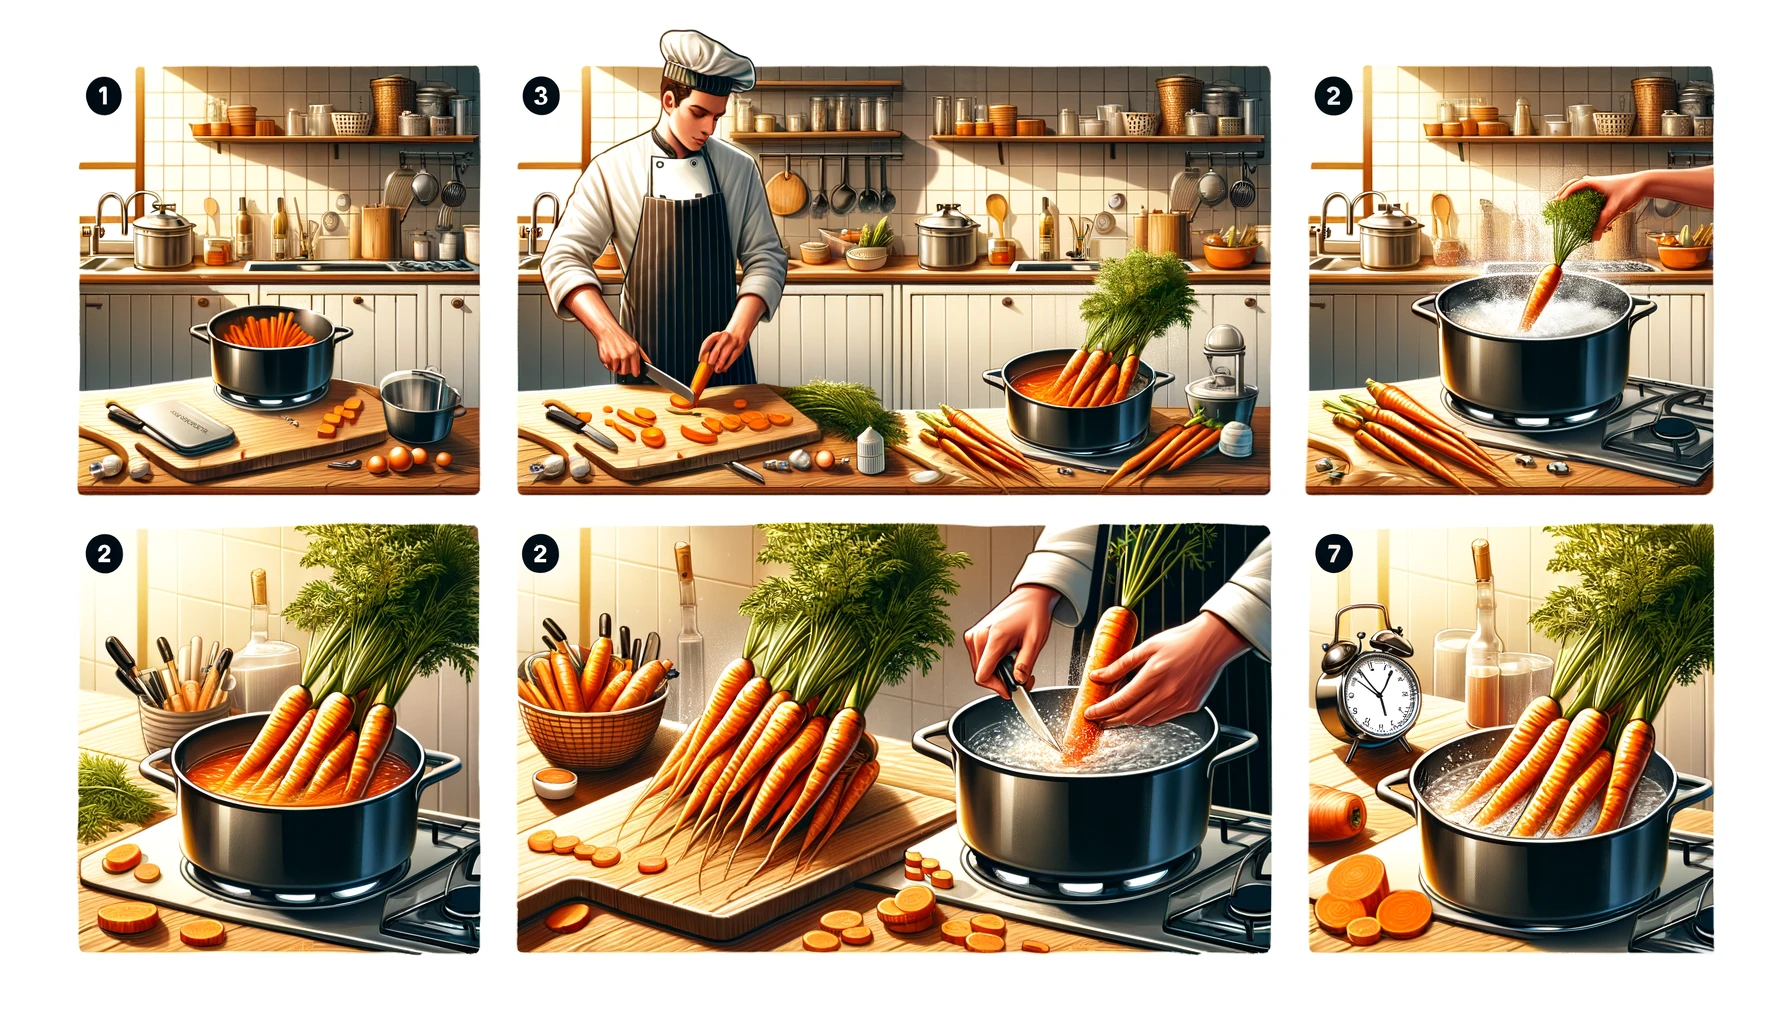 How to Soften Carrots